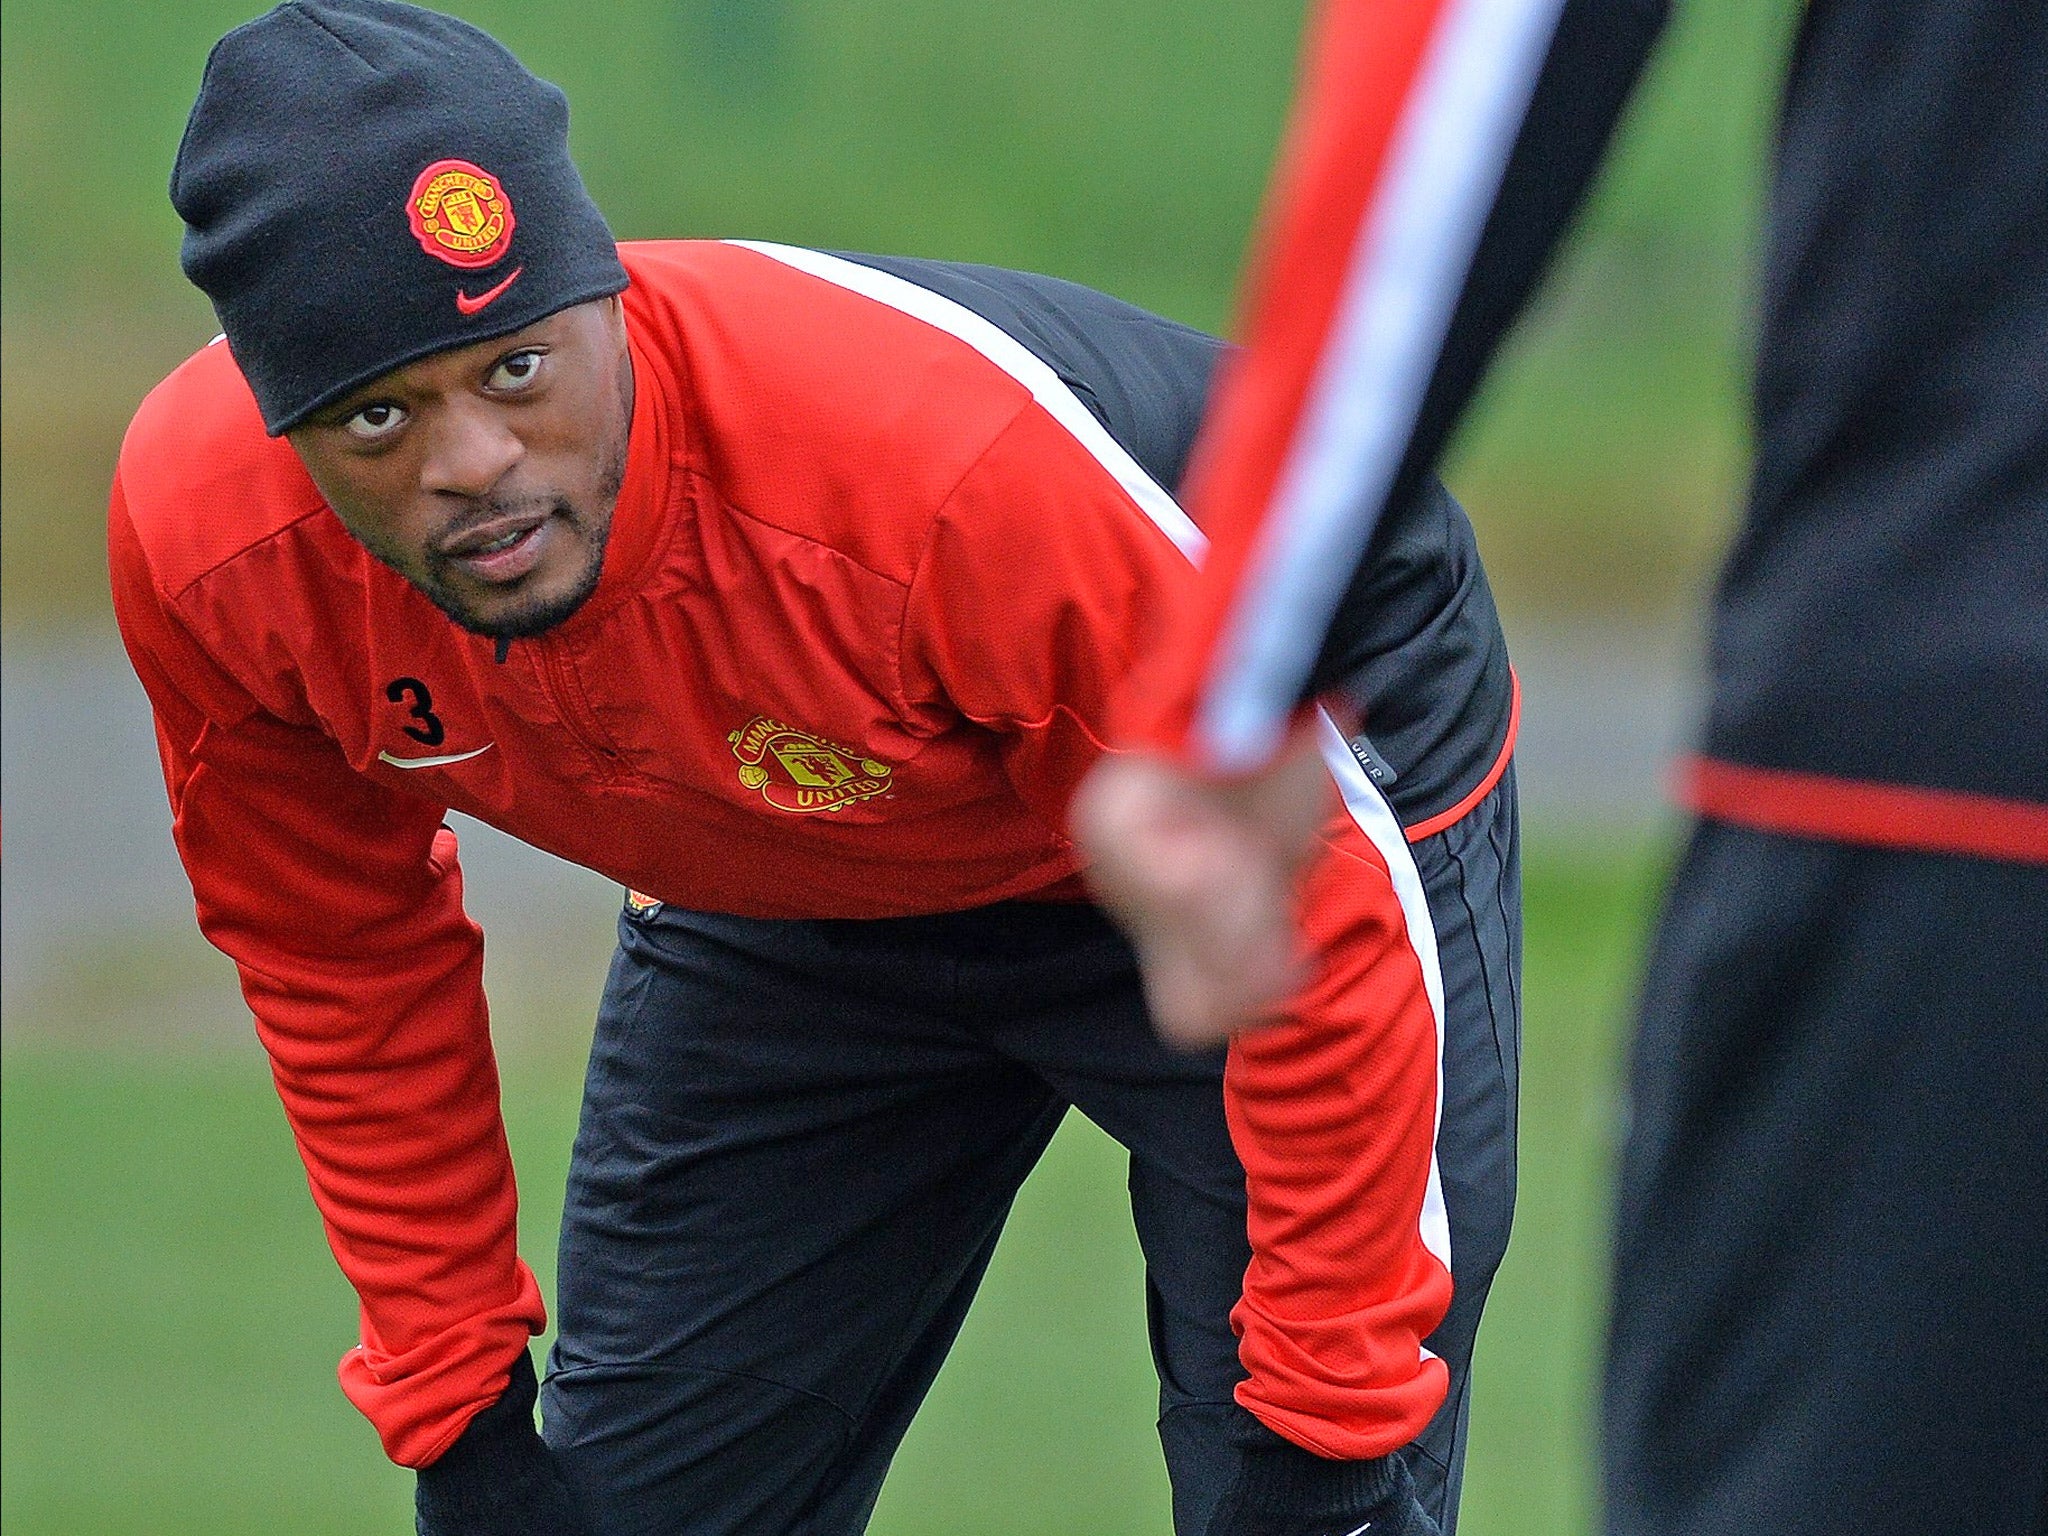 United hope that Patrice Evra will have a change of heart and stay (Getty)